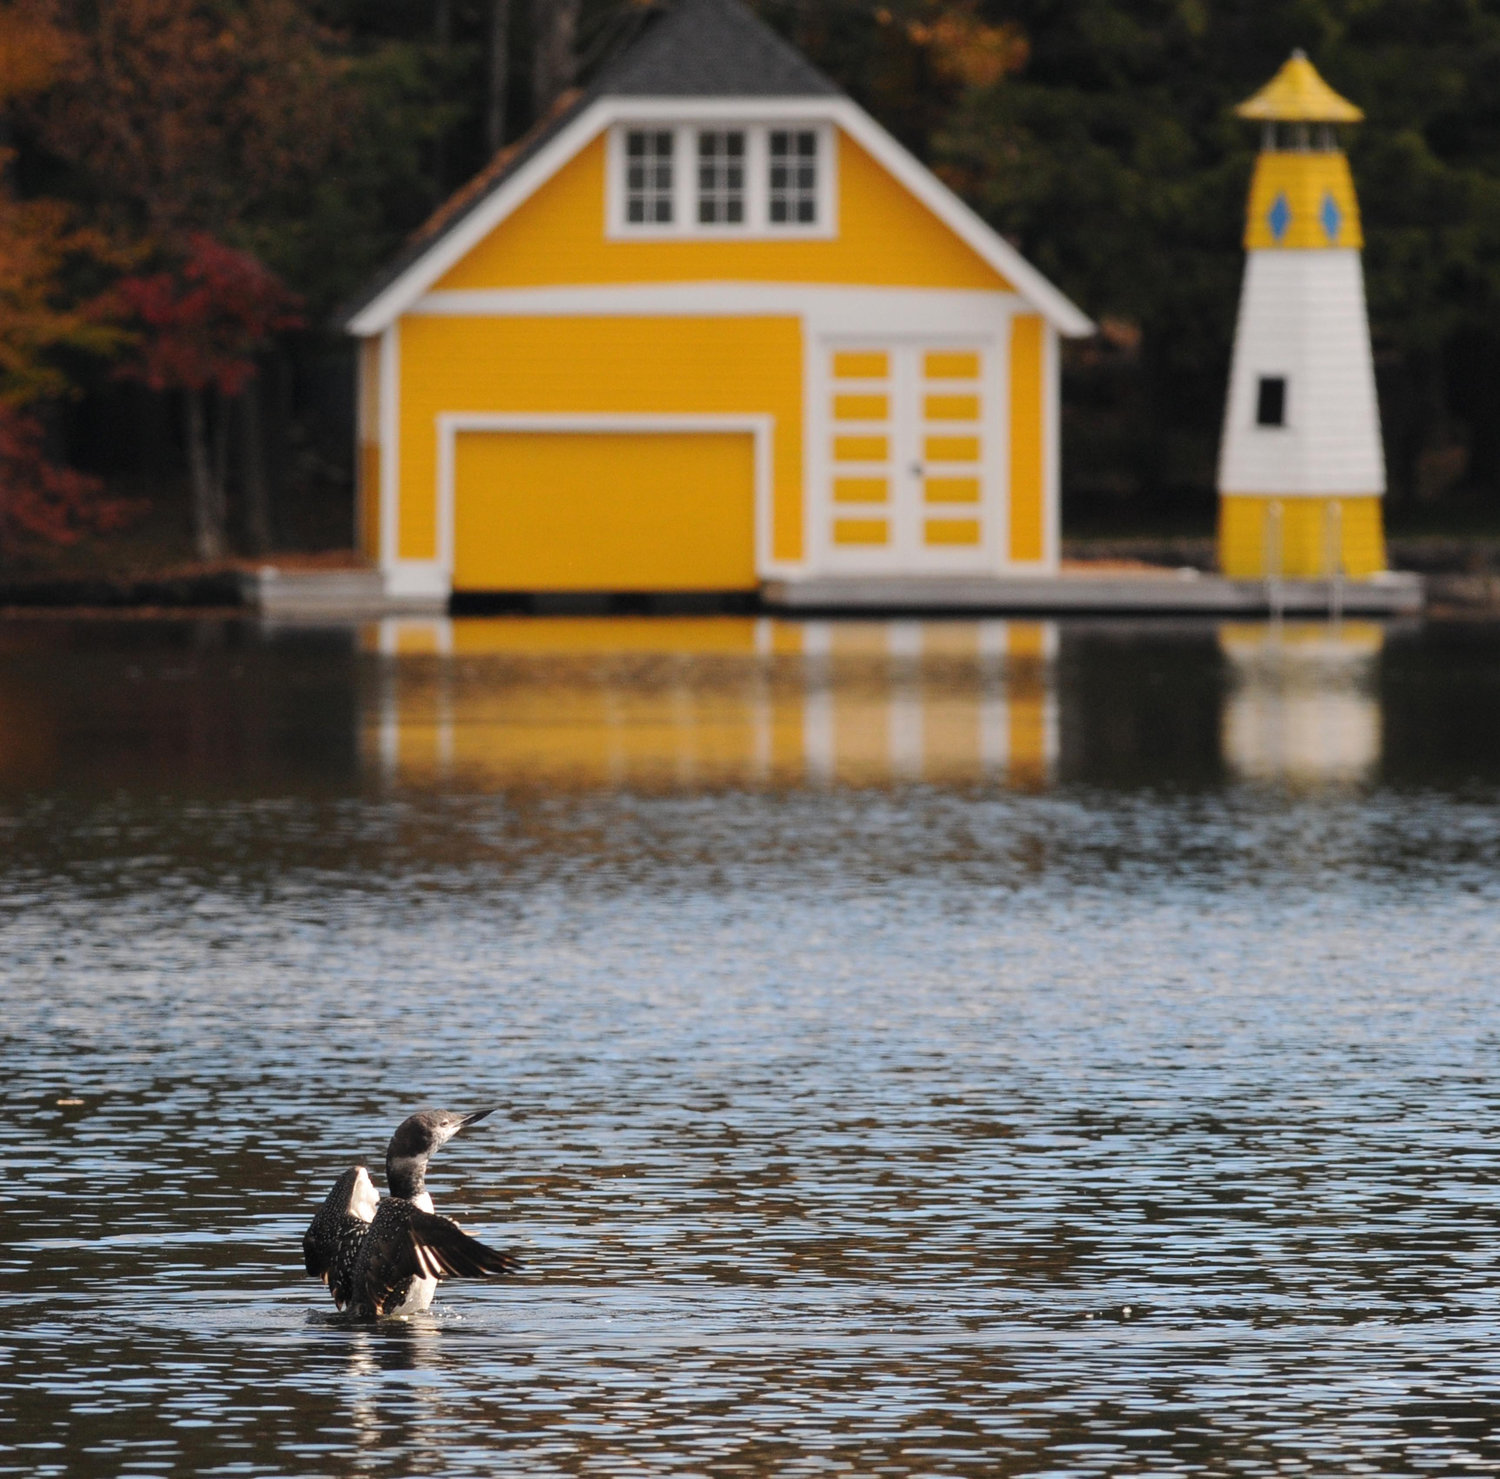 A common loon flaps its wings in the Old Forge Pond with the Little Yellow boathouse in the background.